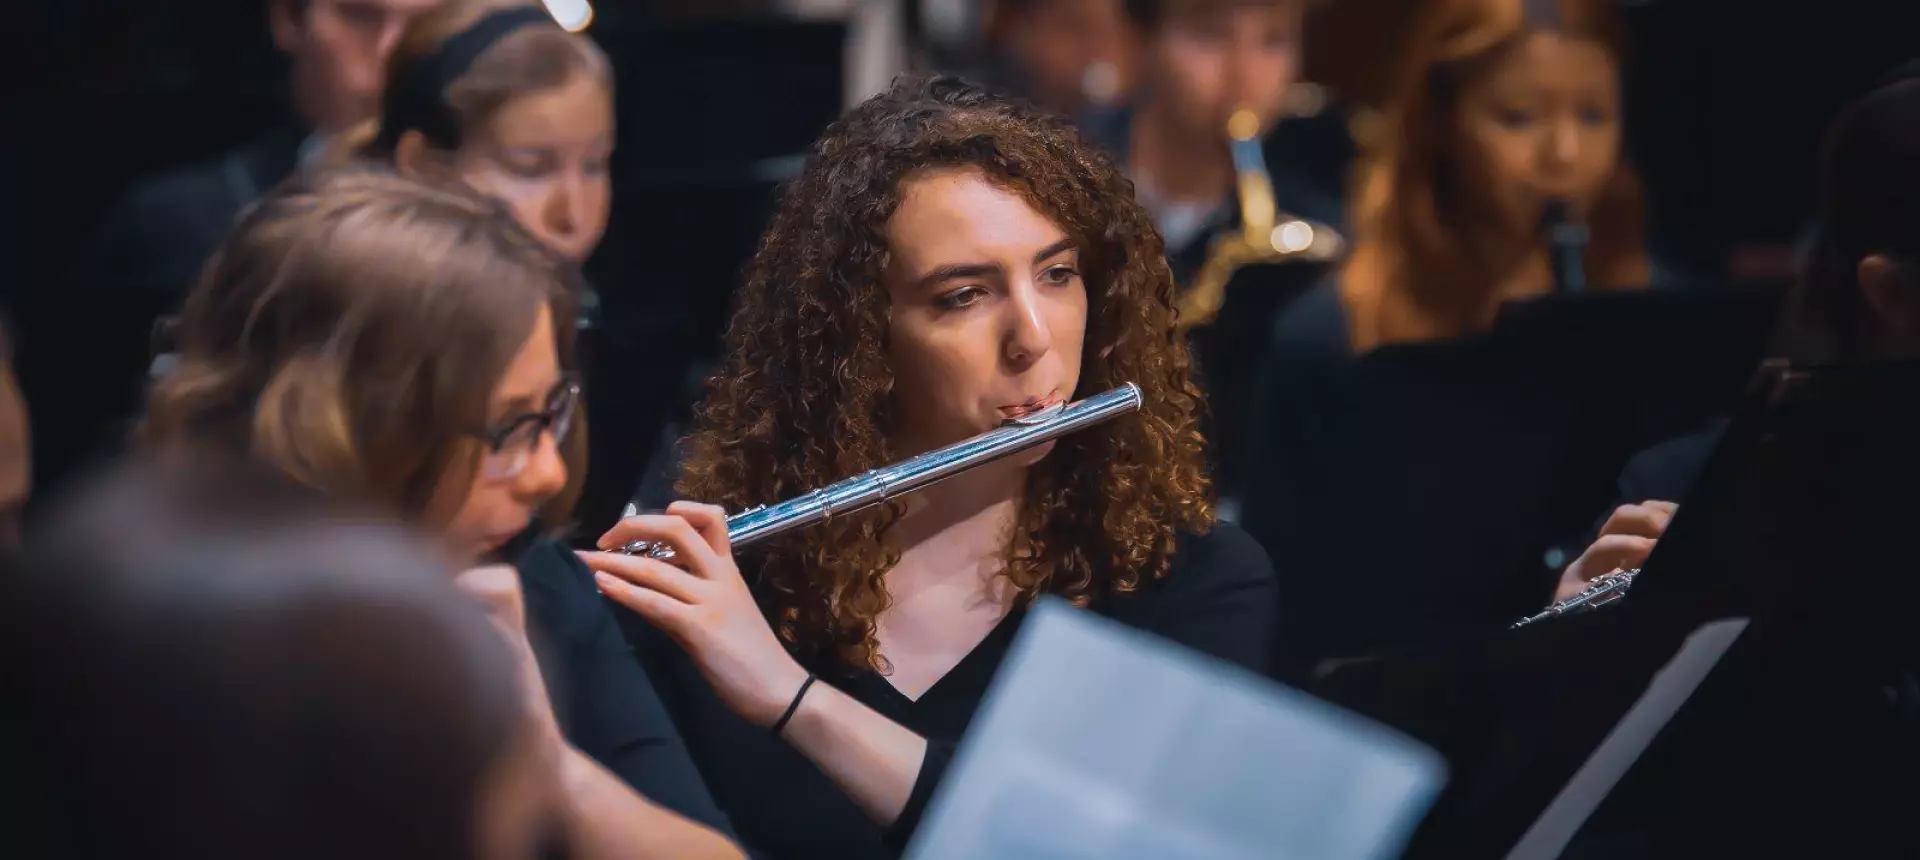 music student plays flute in orchestra on stage